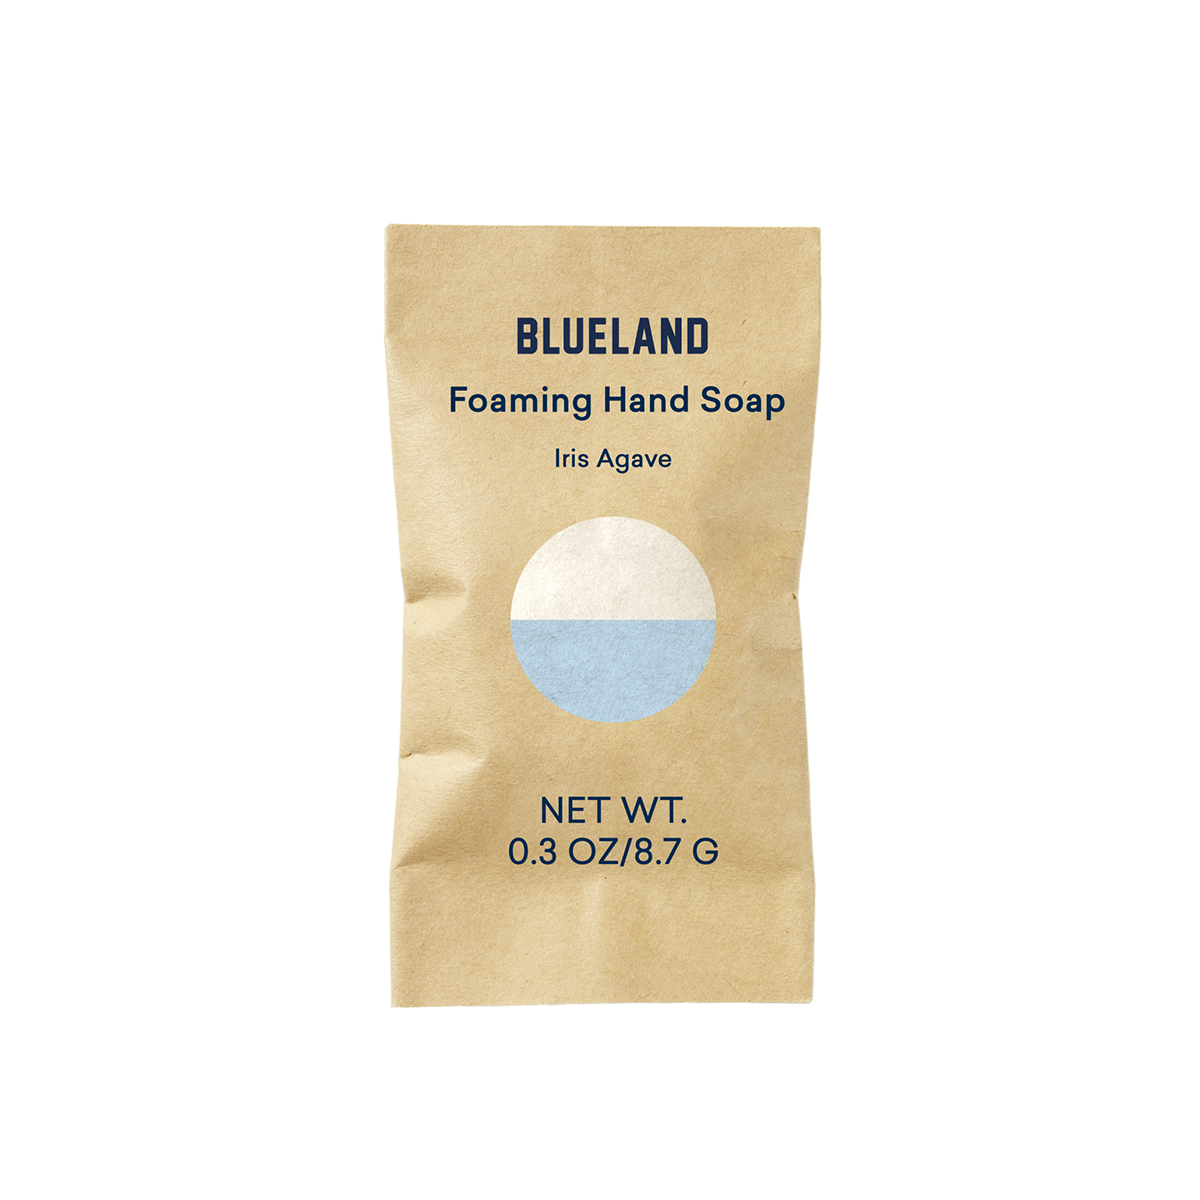 Blueland Foaming Hand Soap Refill Tablet | The Container Store